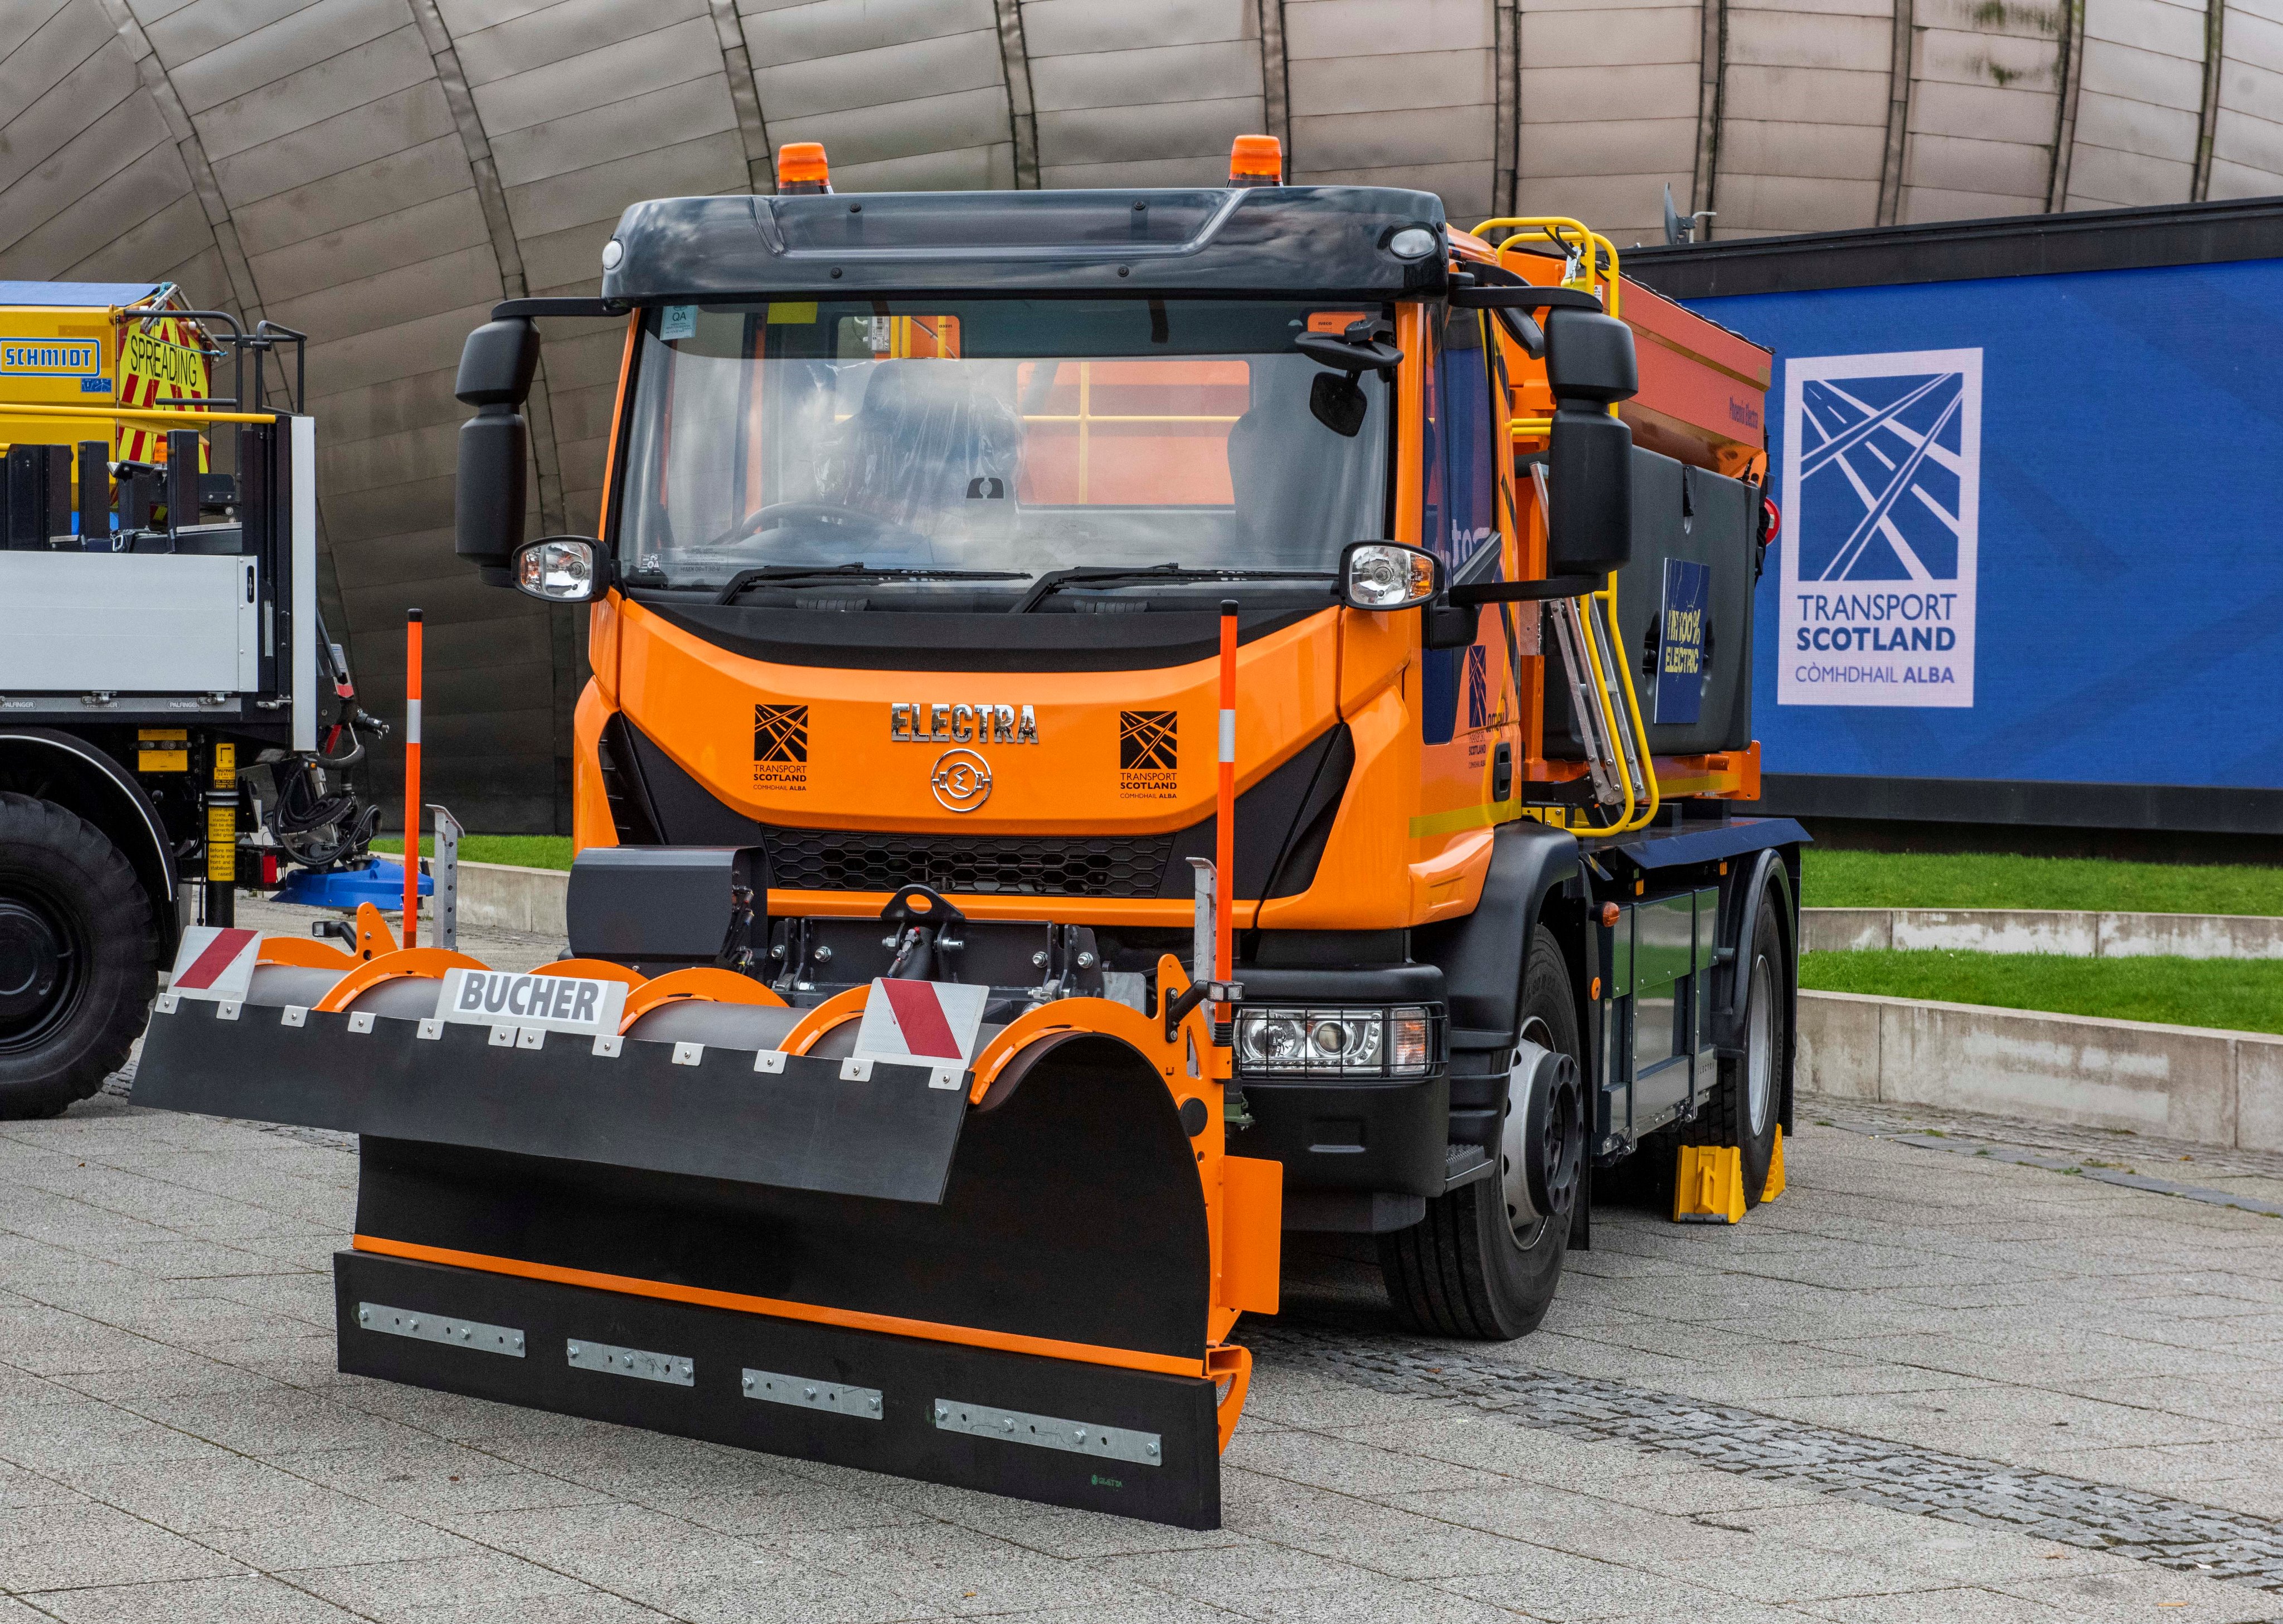 And finally... World’s first electric gritter to clear snow on Forth bridges